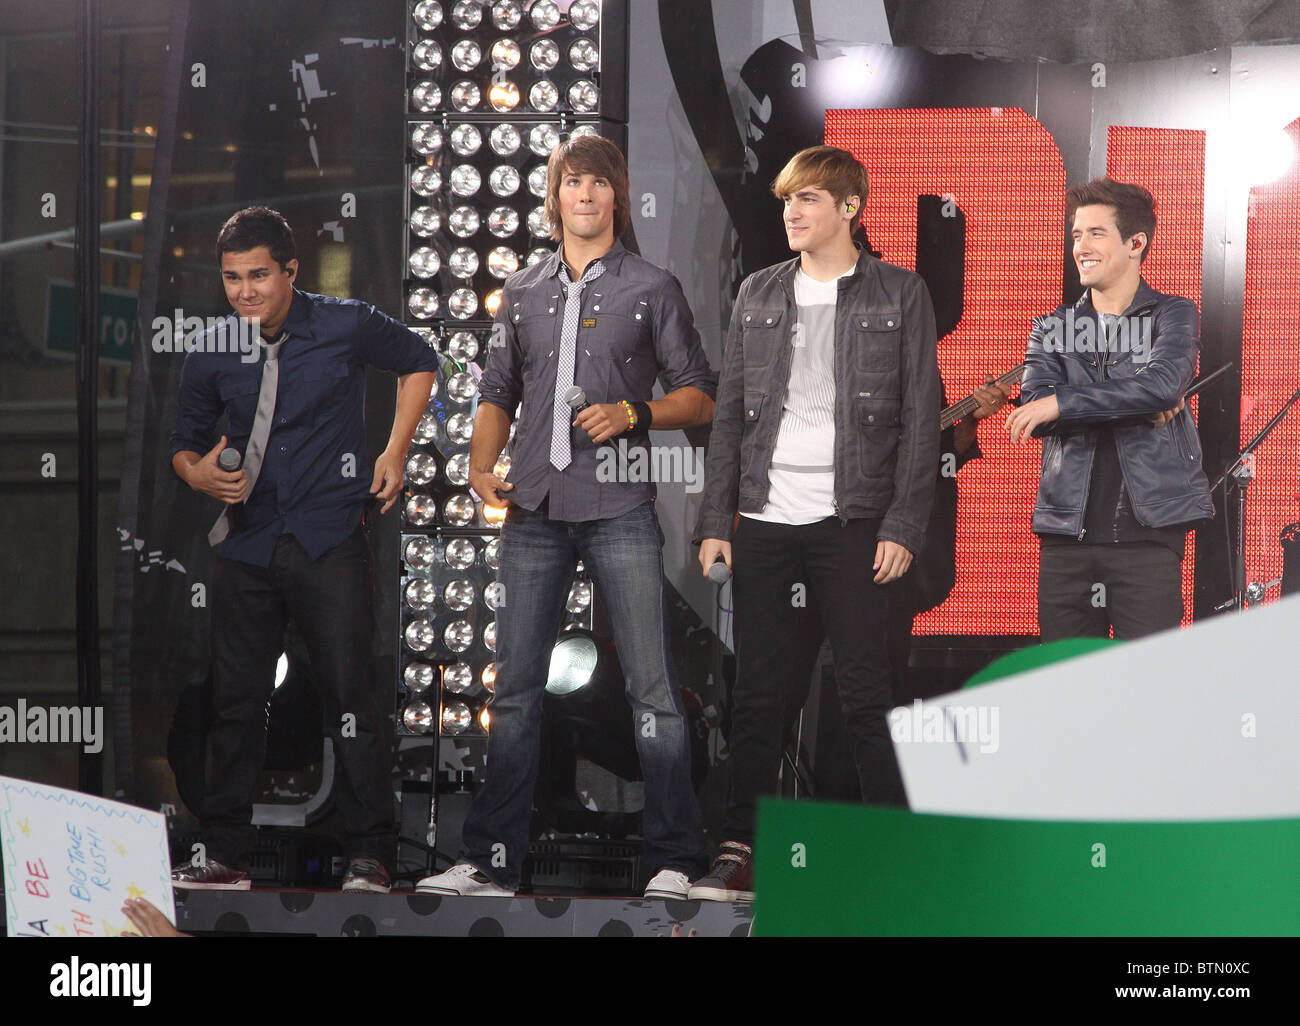 Nickelodeon's BIG TIME RUSH Concert in Times Square Stock Photo